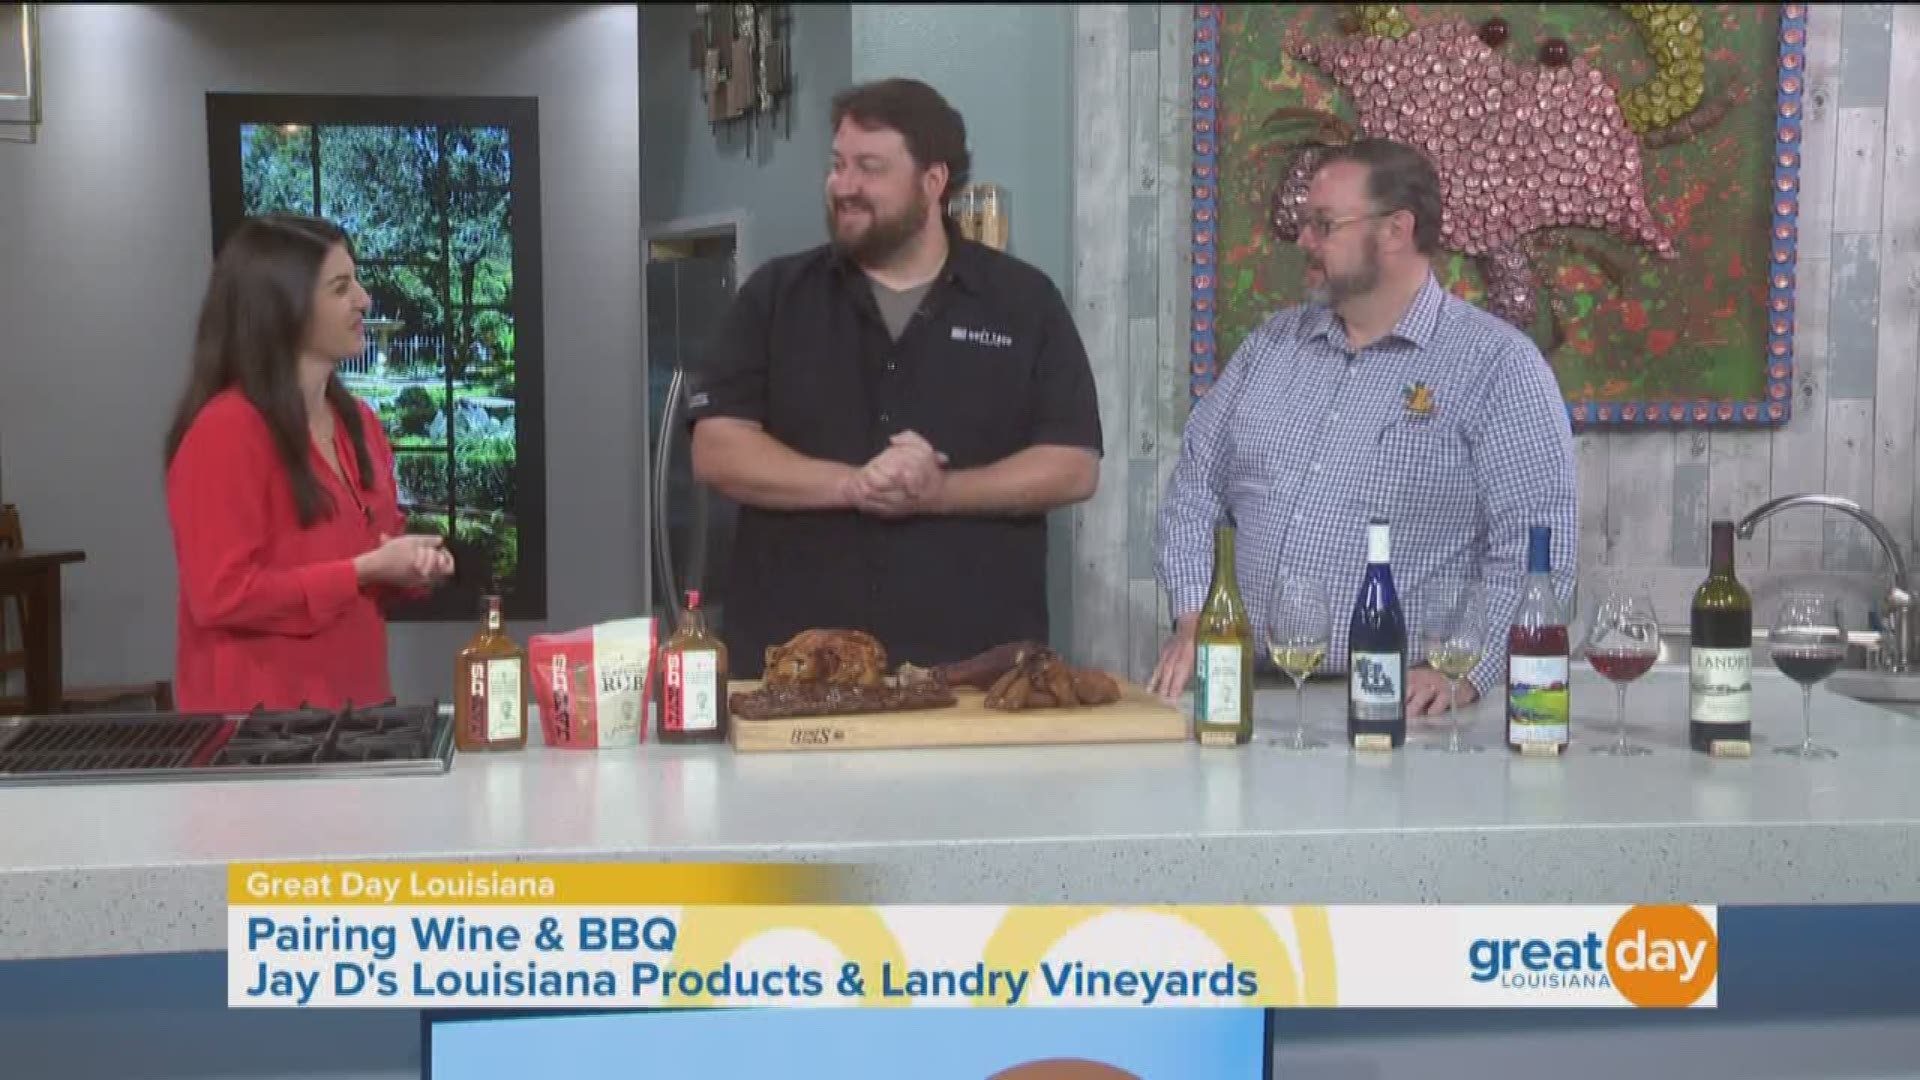 Who knew wine could make such a delicious pairing with BBQ? Chef Jay Ducote with Jay D's Louisiana Products is in the kitchen this morning with Landy Vineyards showing us which wines pair best with BBQ. You can visit JayDucote.com or LandyVineyards.com for more information.